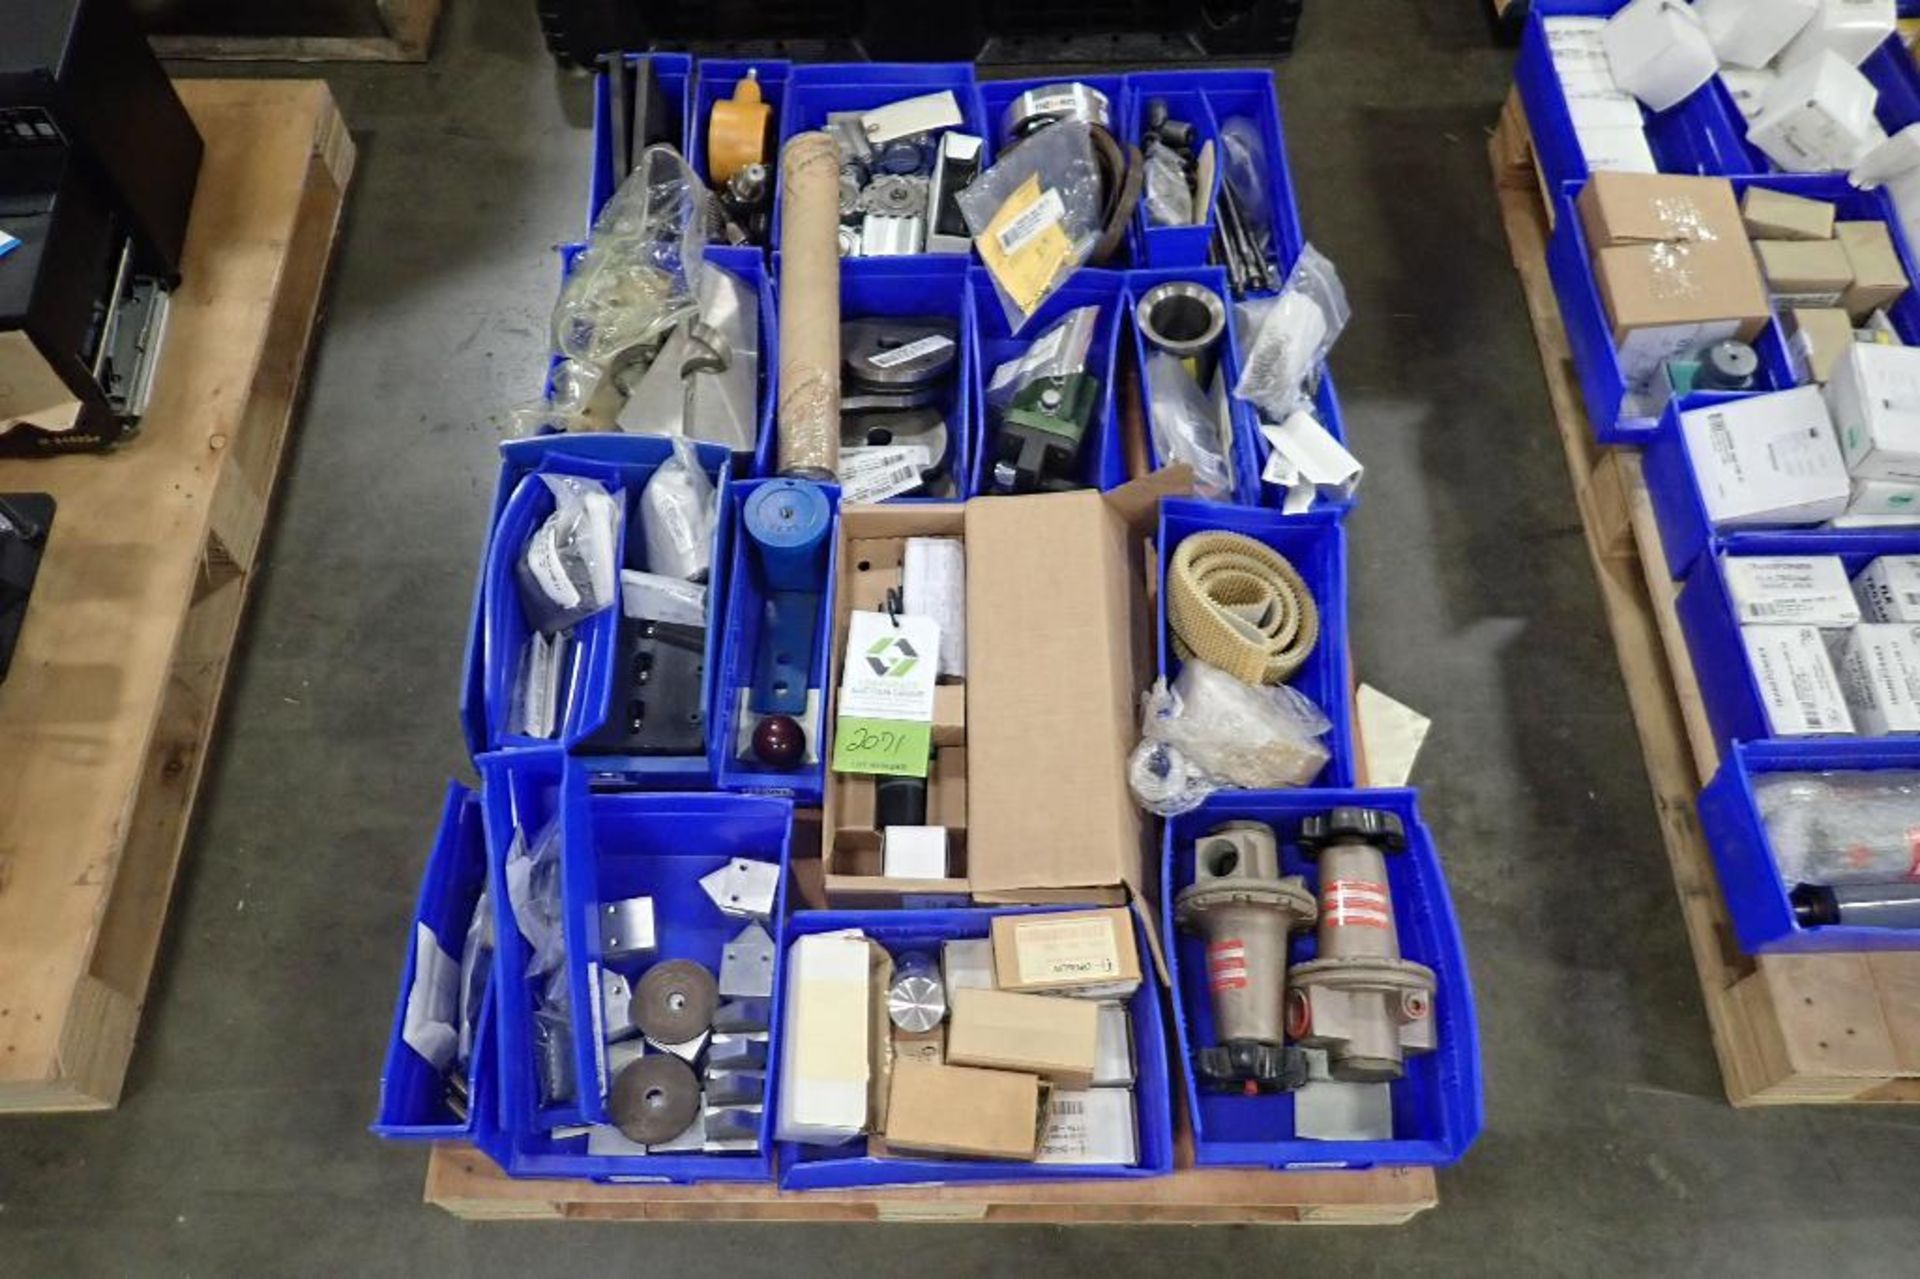 (3) skids of parts, filters, gauges, actuated valves, regulators. (See photos for additional specs).